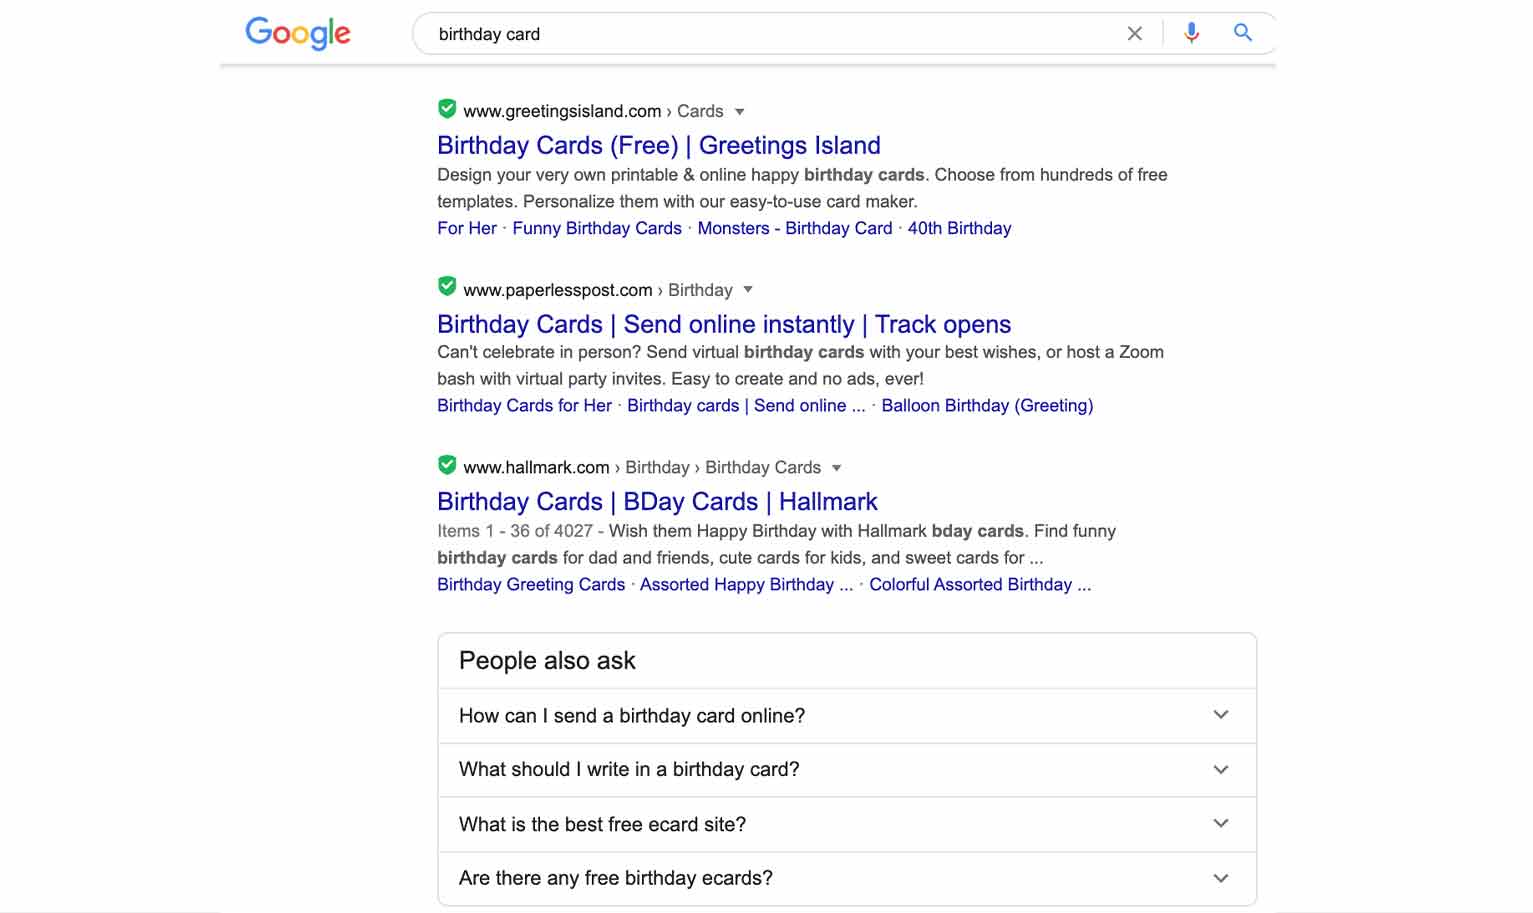 A search for “birthday card” on Google results in a mix of options.